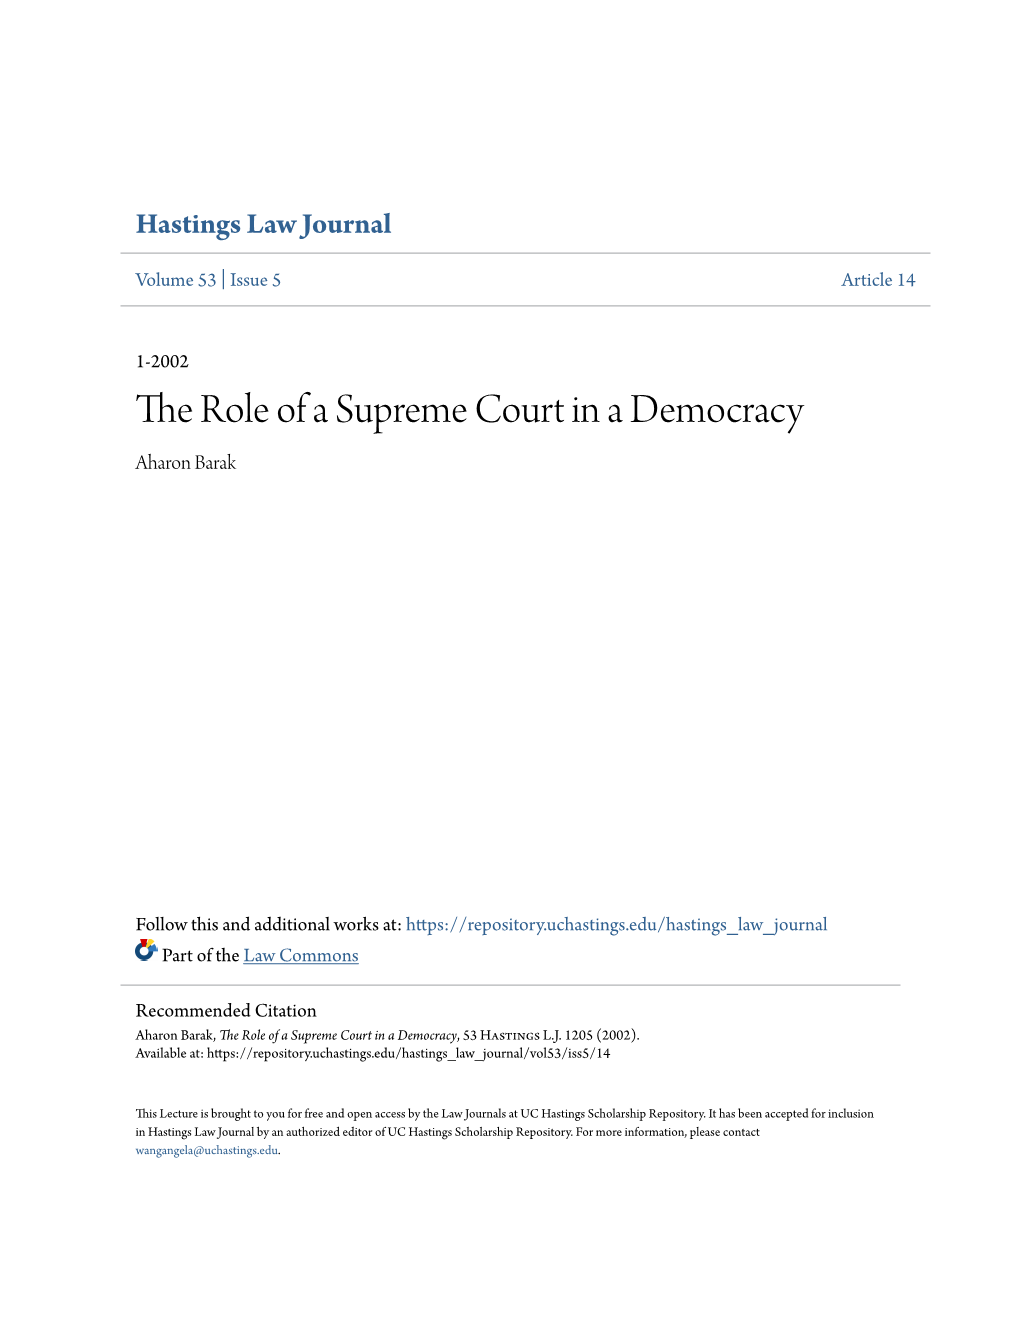 The Role of a Supreme Court in a Democracy Aharon Barak